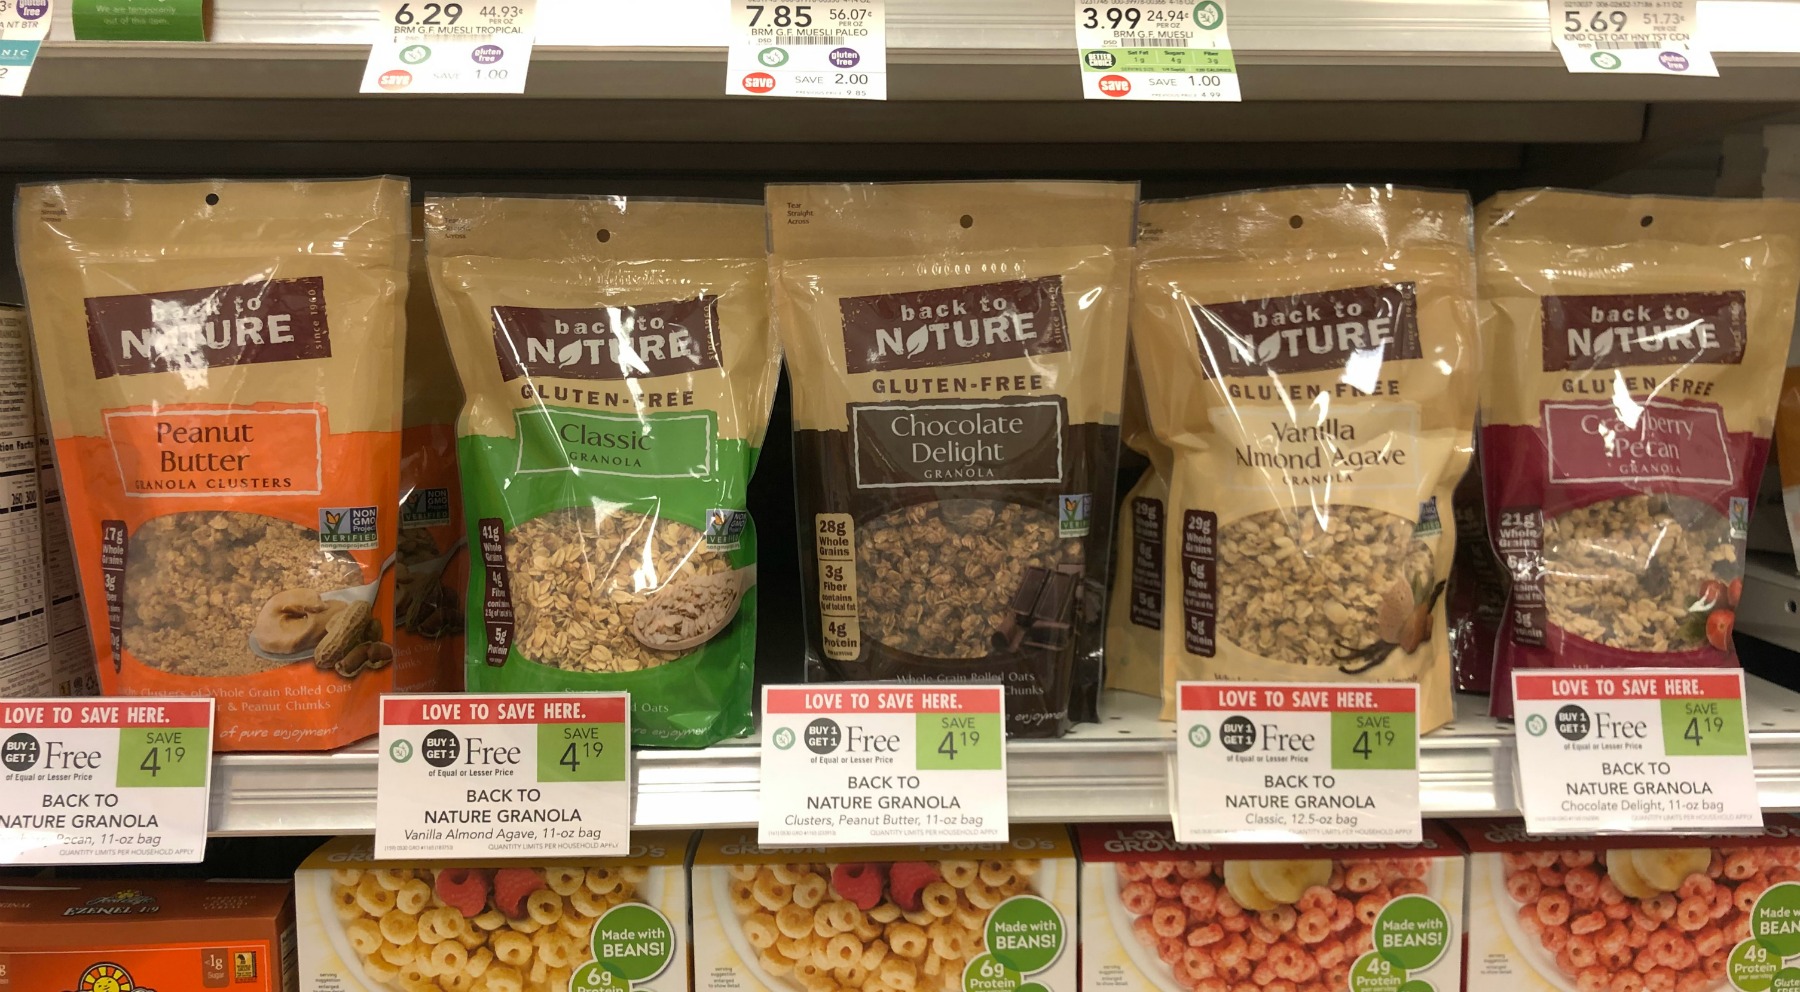 Fantastic Deal On Back To Nature Granola This Week At Publix on I Heart Publix 2